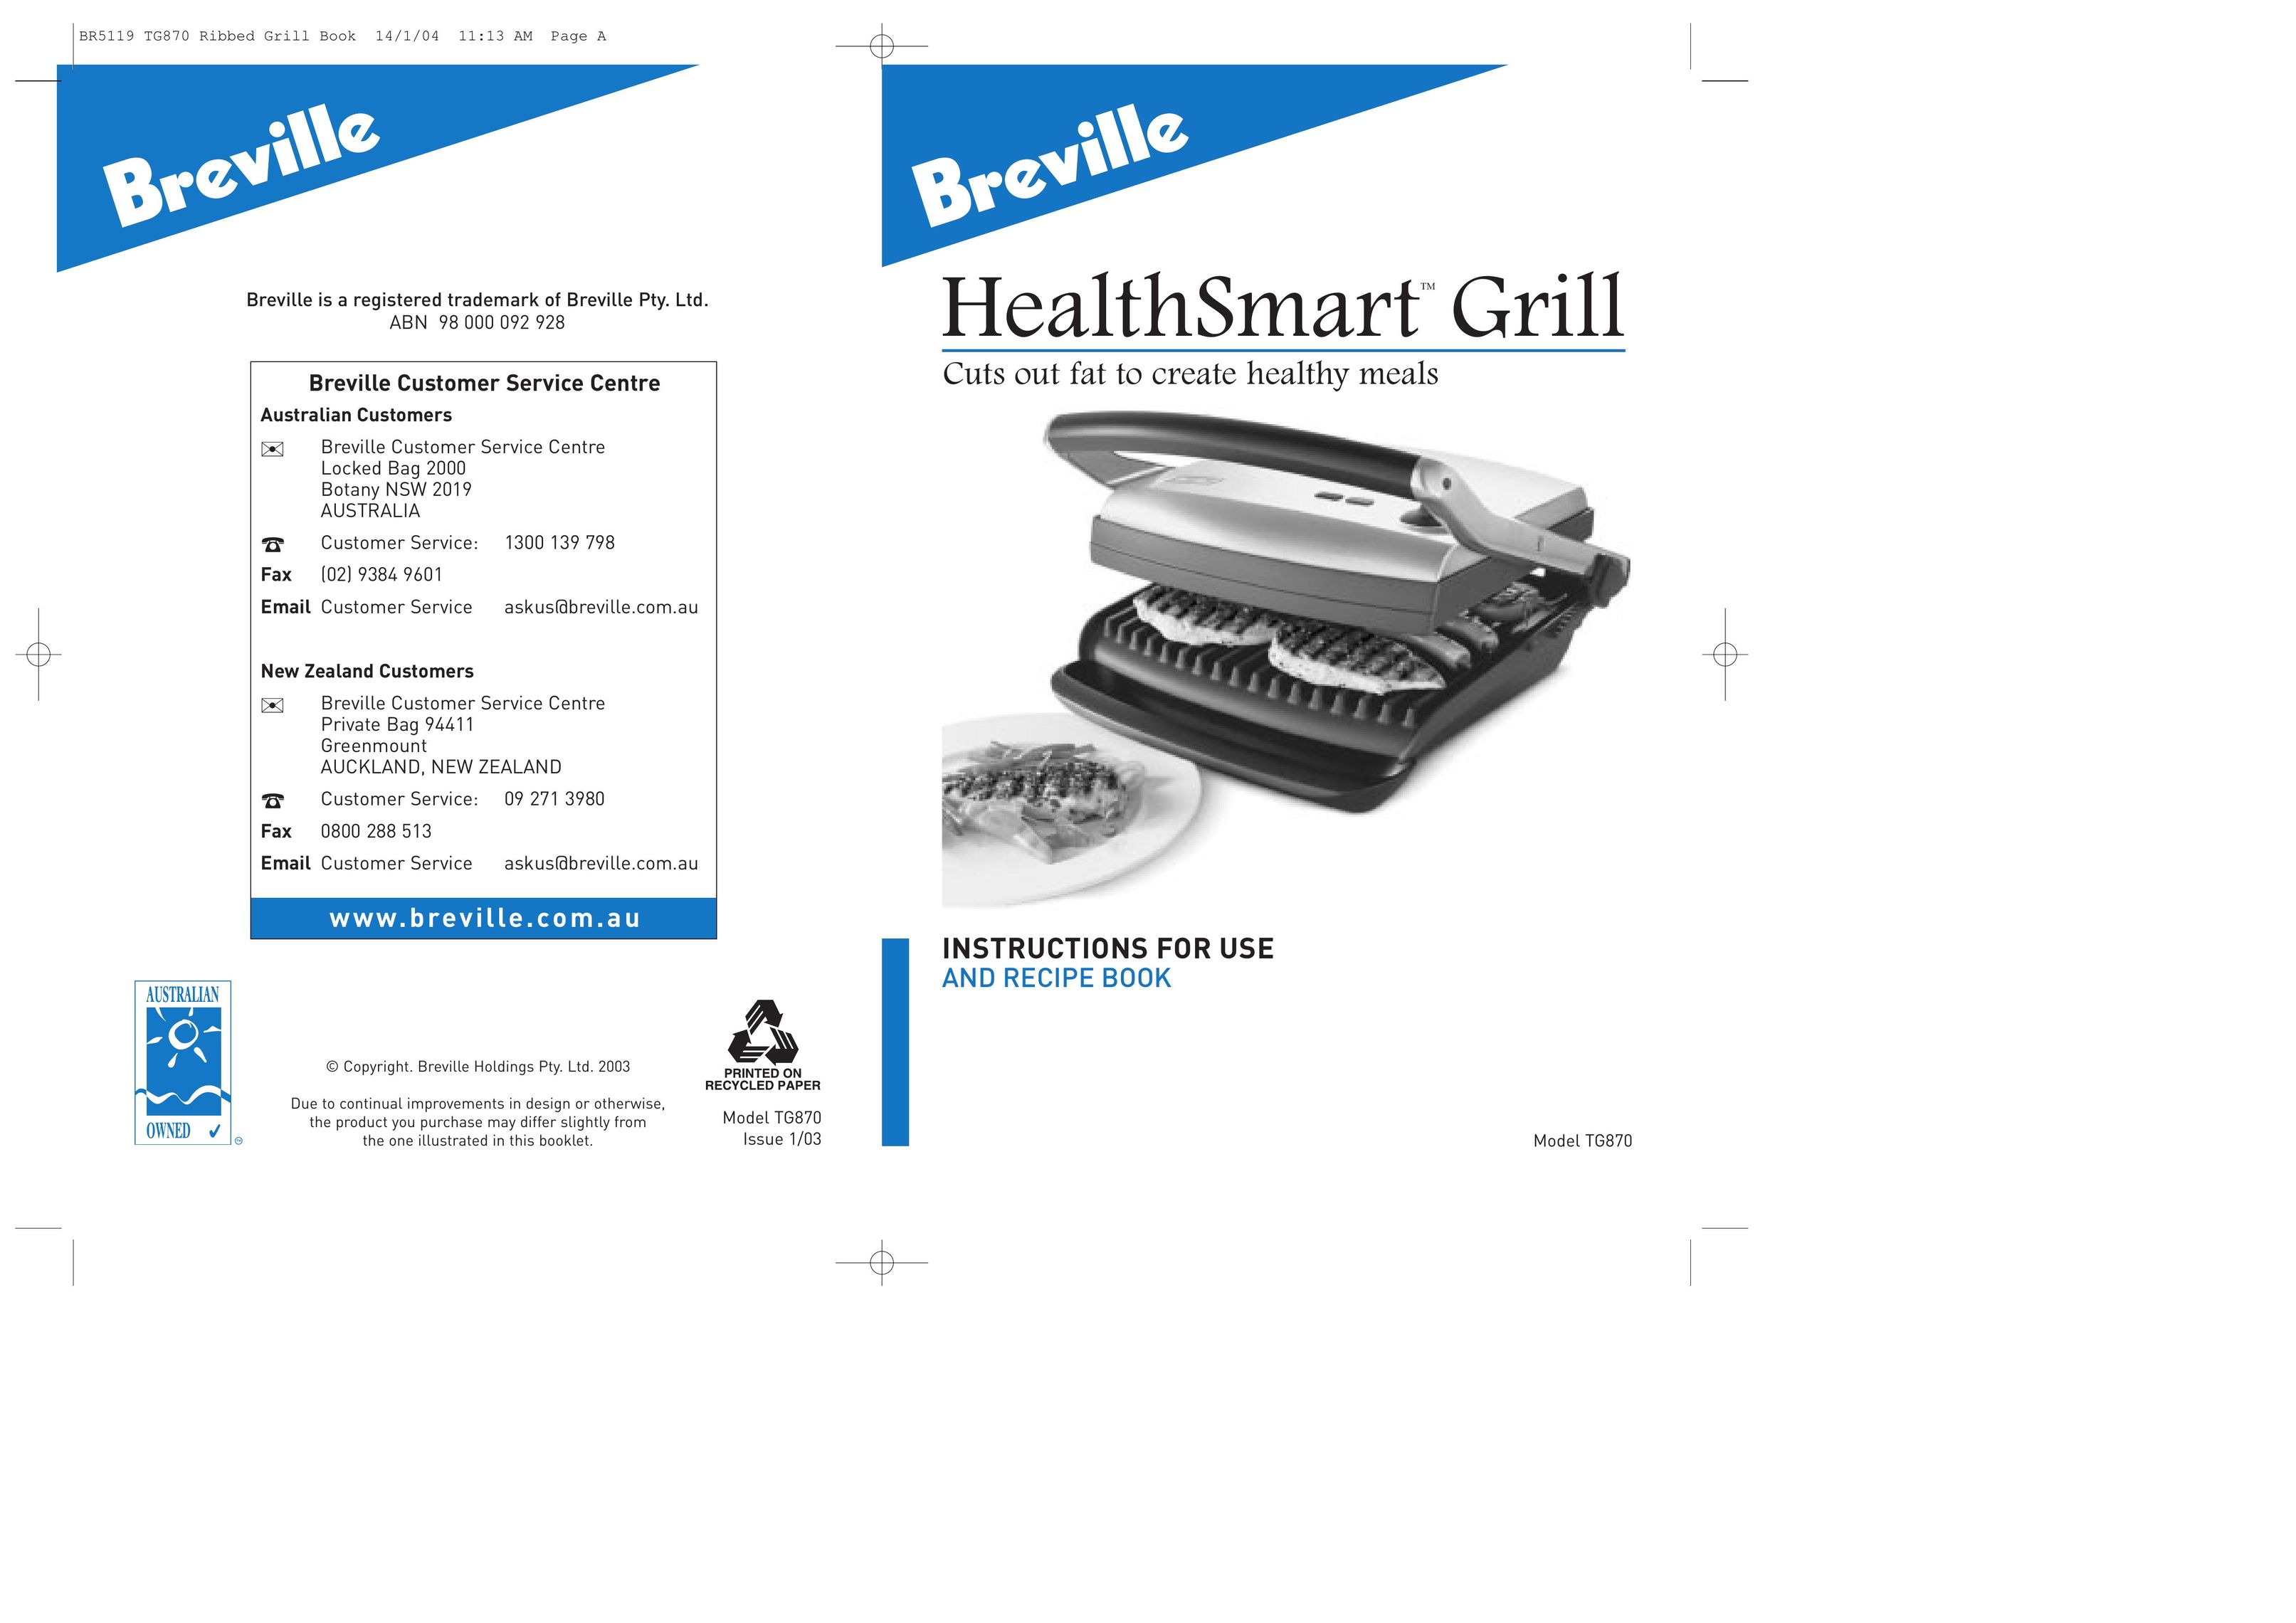 Breville TG870 Kitchen Grill User Manual